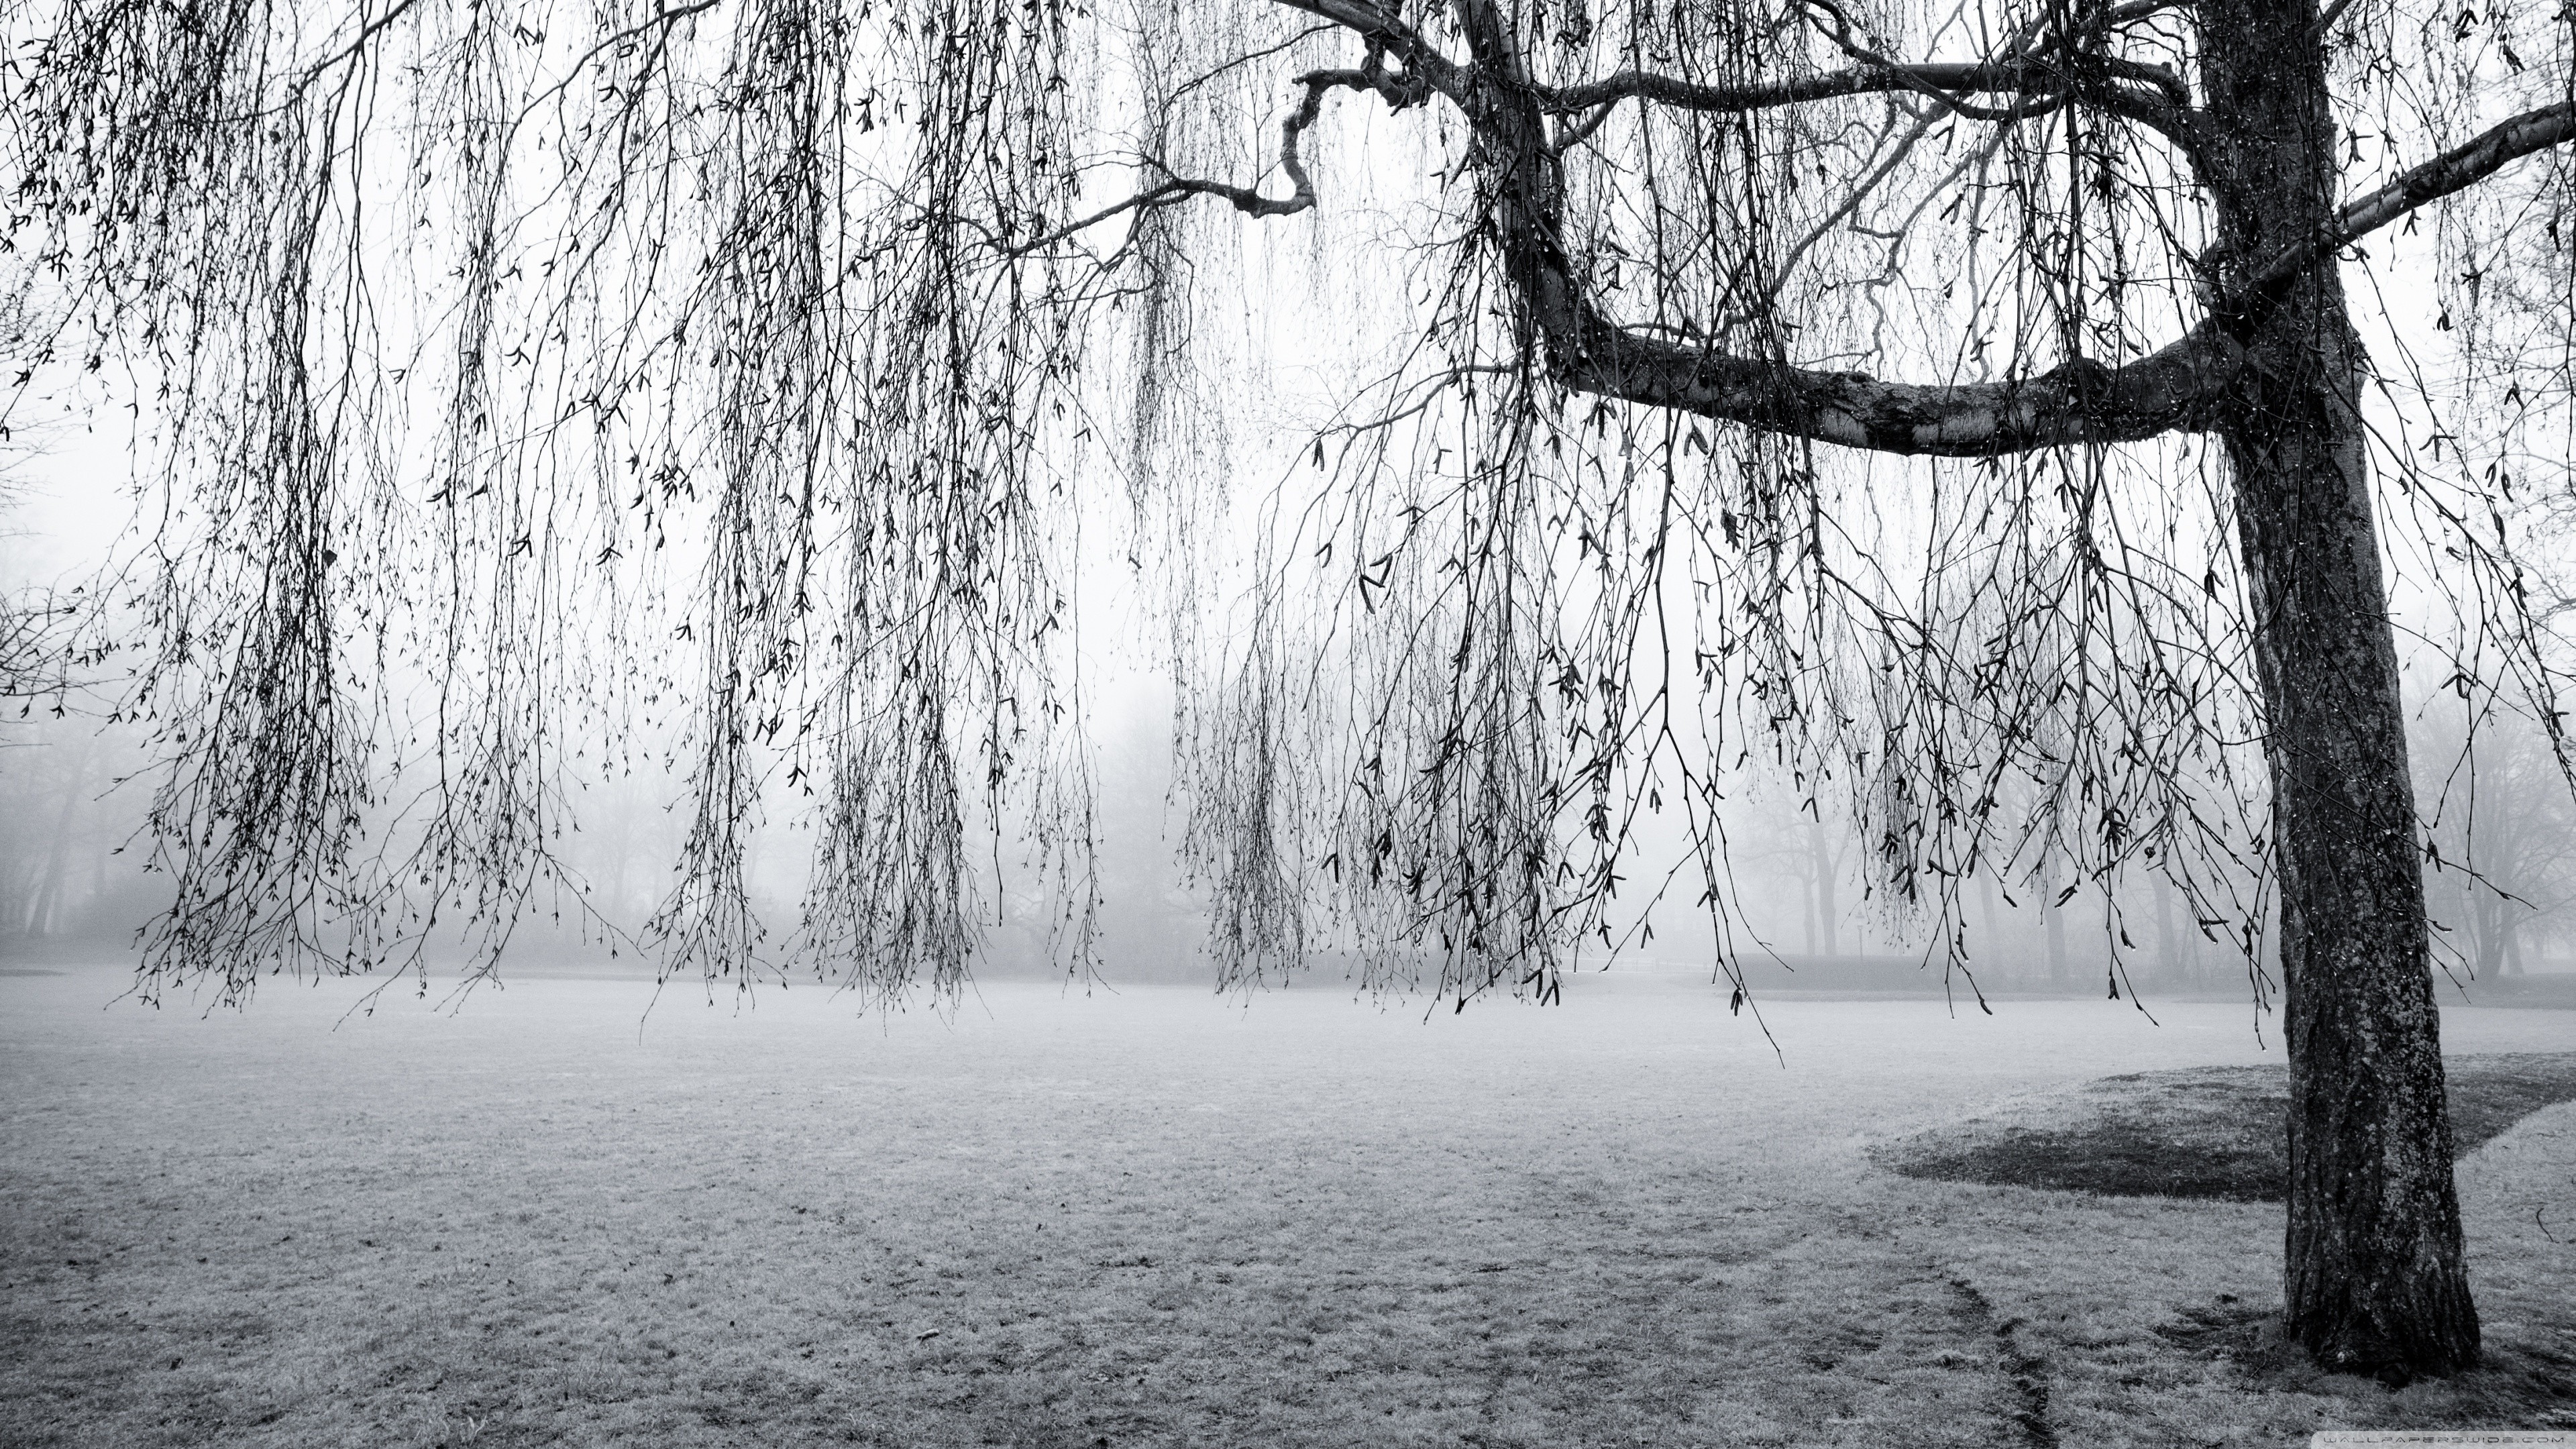 General 3840x2160 photography trees snow frost gray mist nature field overcast gloomy winter cold outdoors